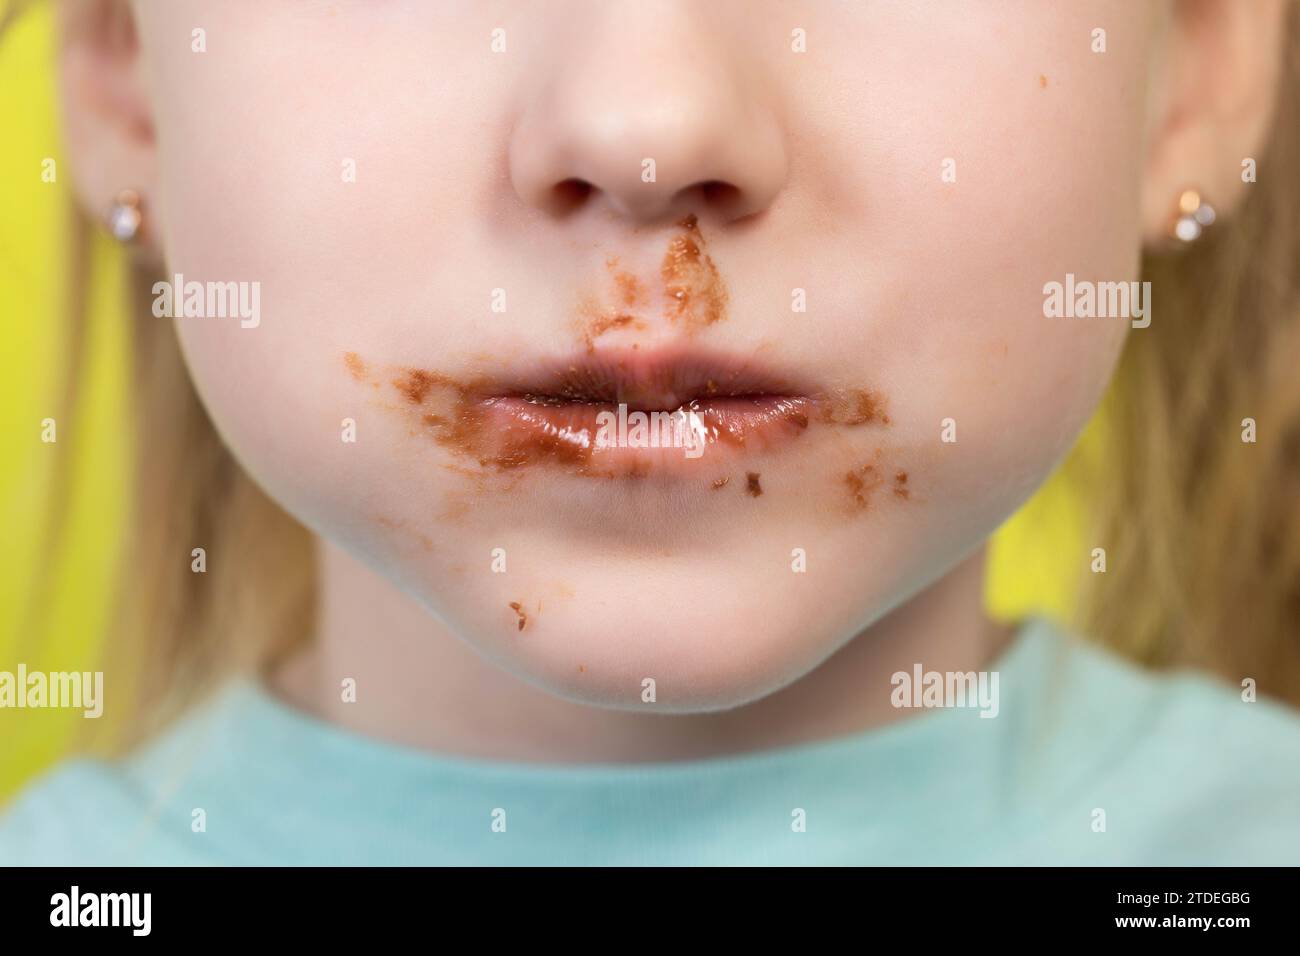 Little girl's mouth dirty with chocolate on a yellow background. Concept of children with a sweet tooth. Stock Photo